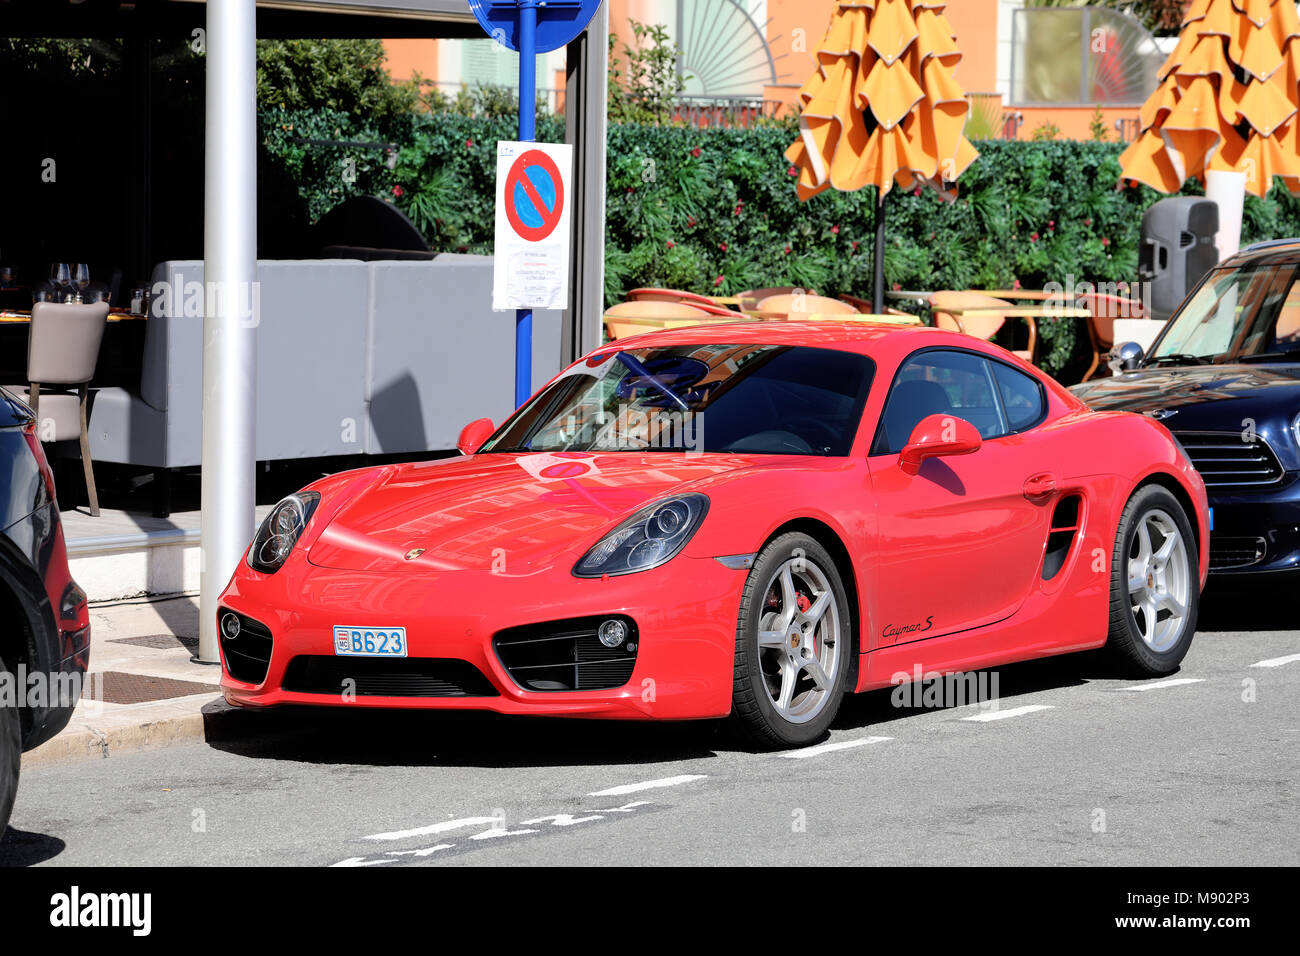 Menton, France - March 19, 2018: Luxury Red Porsche 718 Cayman S Parked In The Street Of Menton On The French Riviera Stock Photo